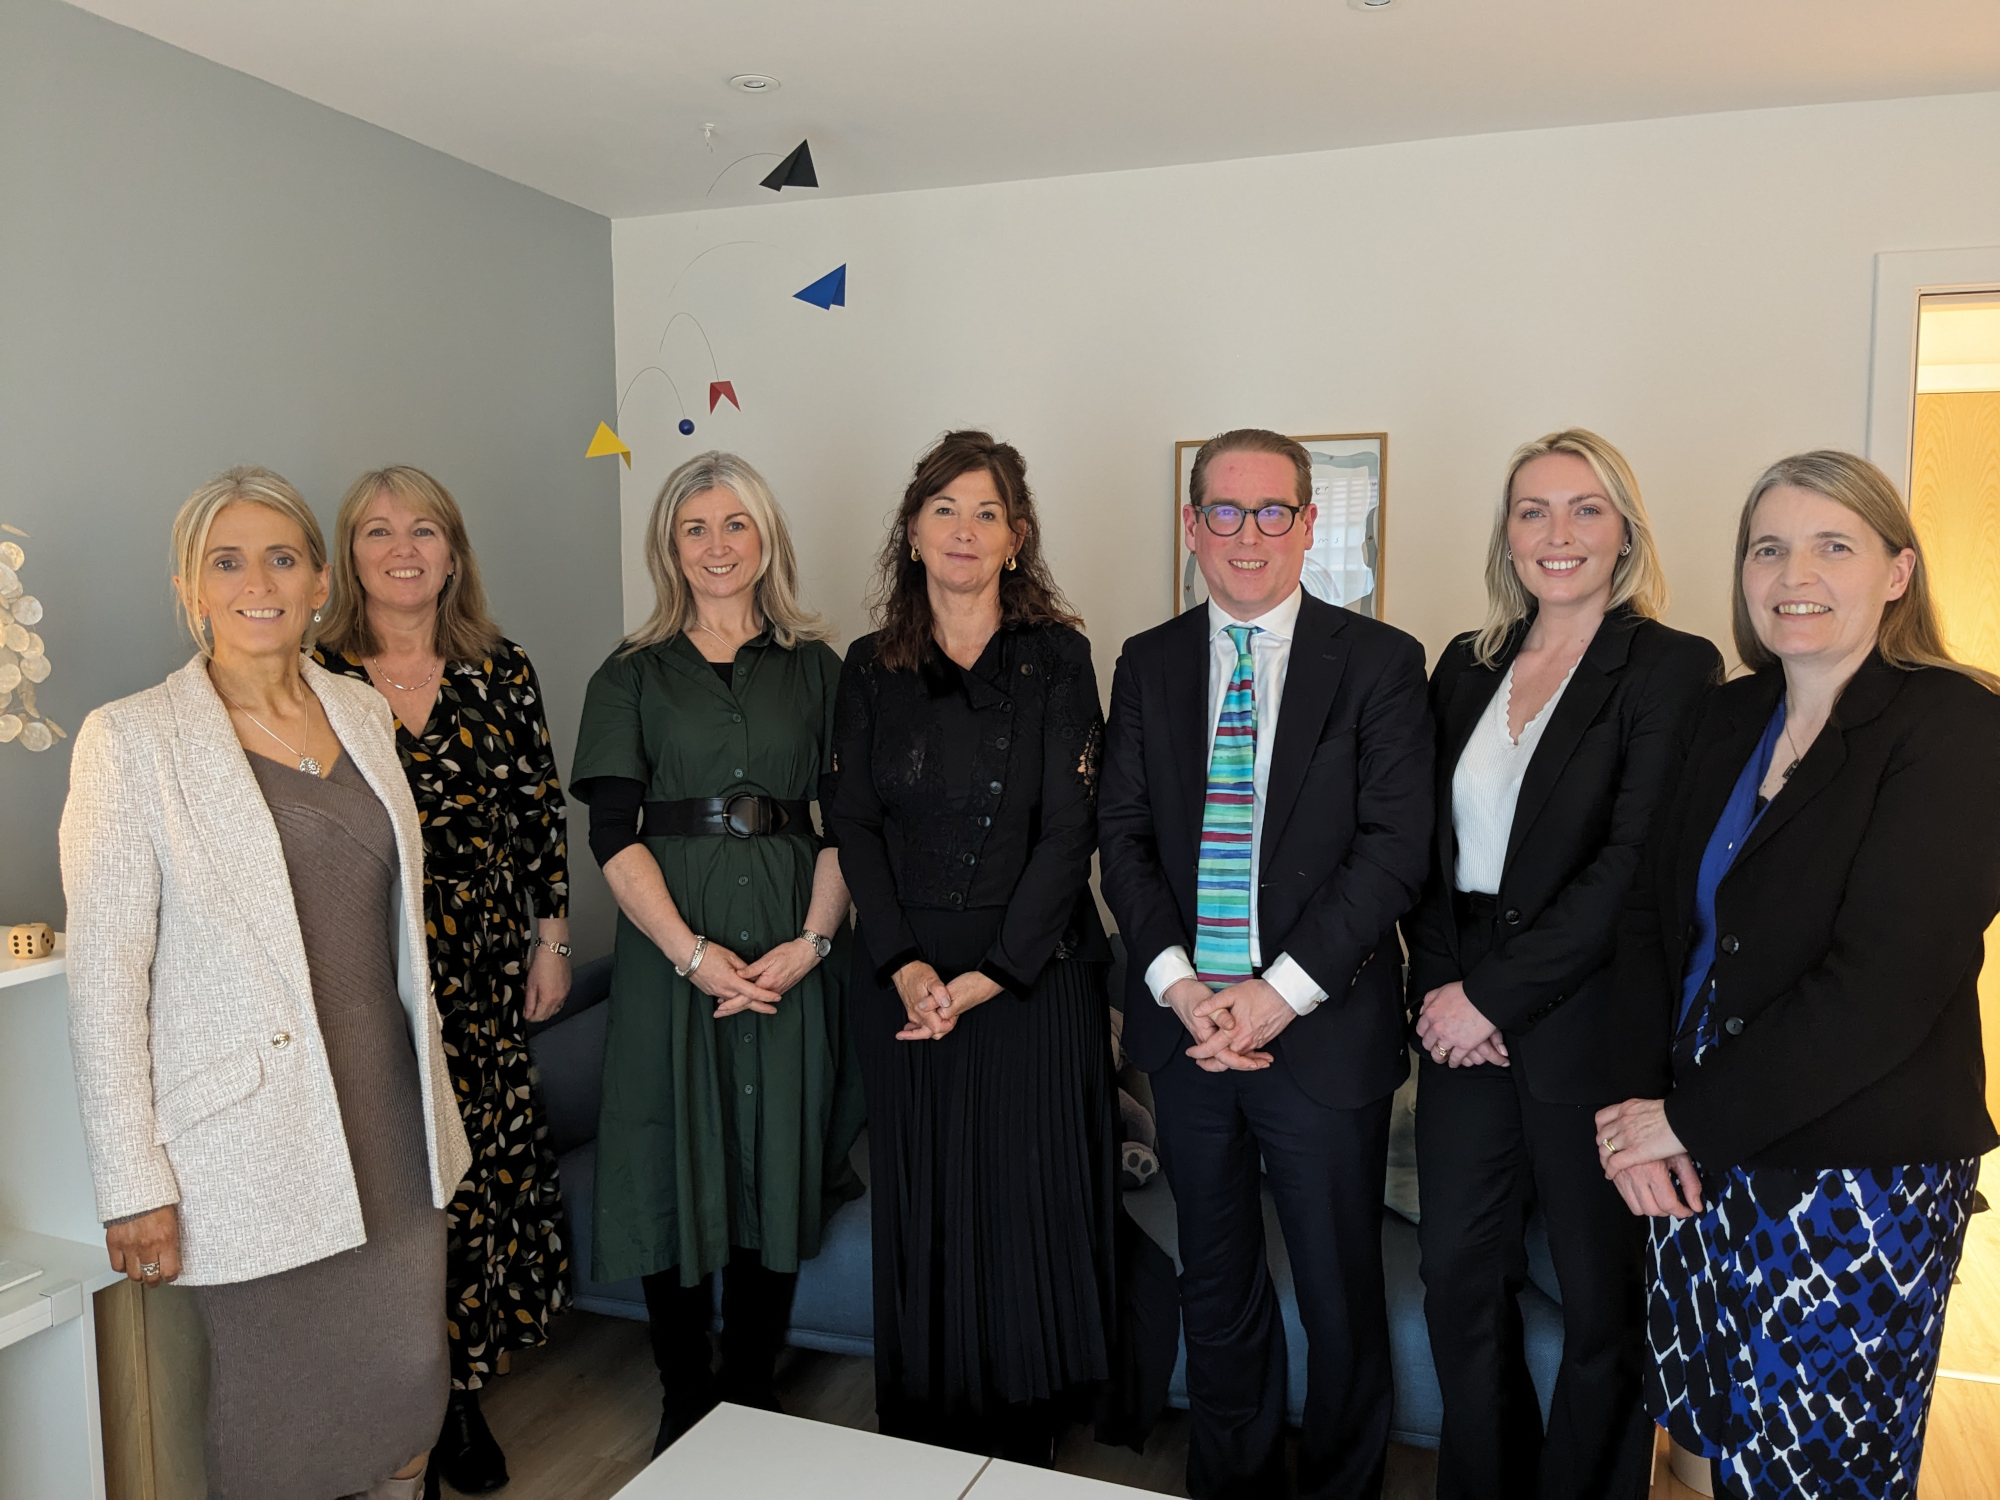 Law officers visit Scotland's first Bairns Hoose